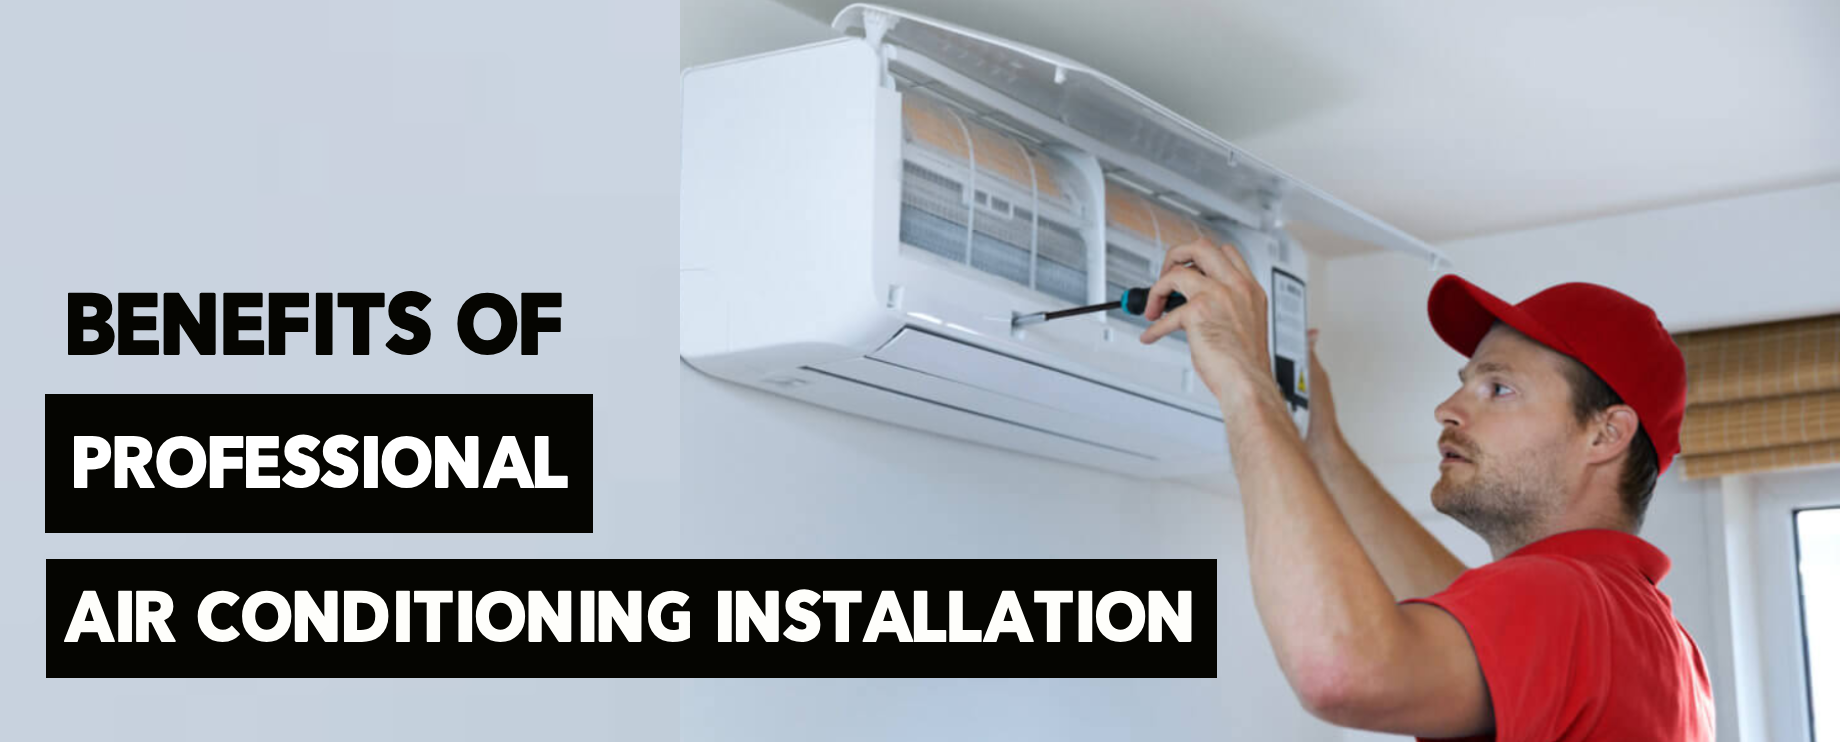 Benefits of Professional Air Conditioning Installation